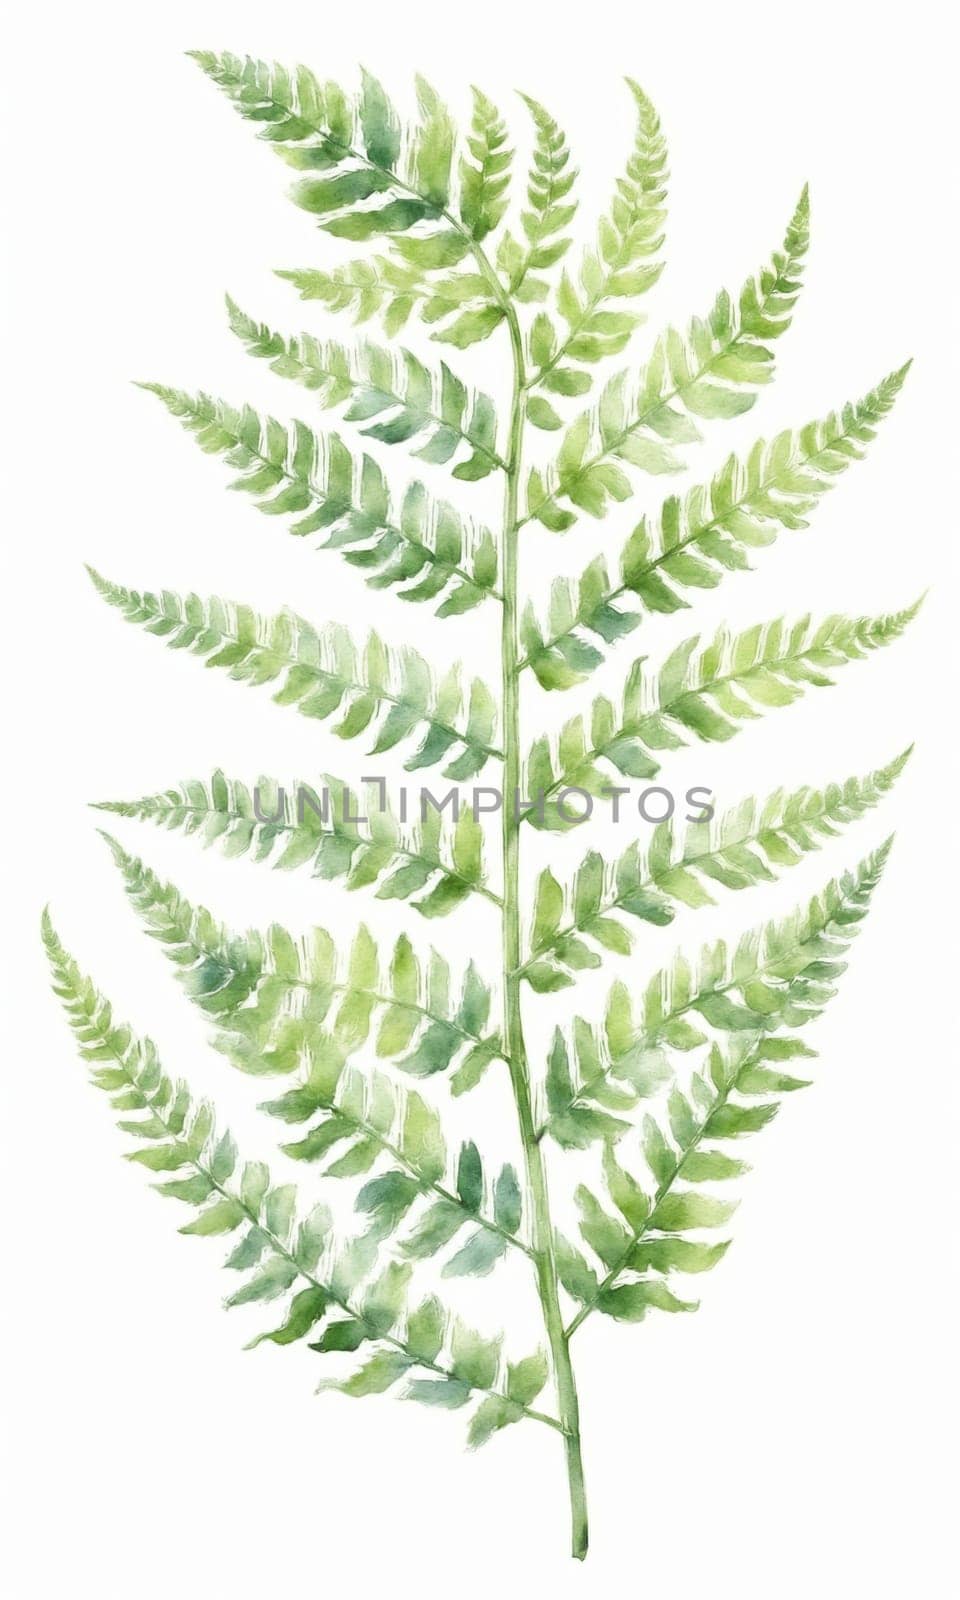 watercolor drawing of fern leaf on white background by Andre1ns